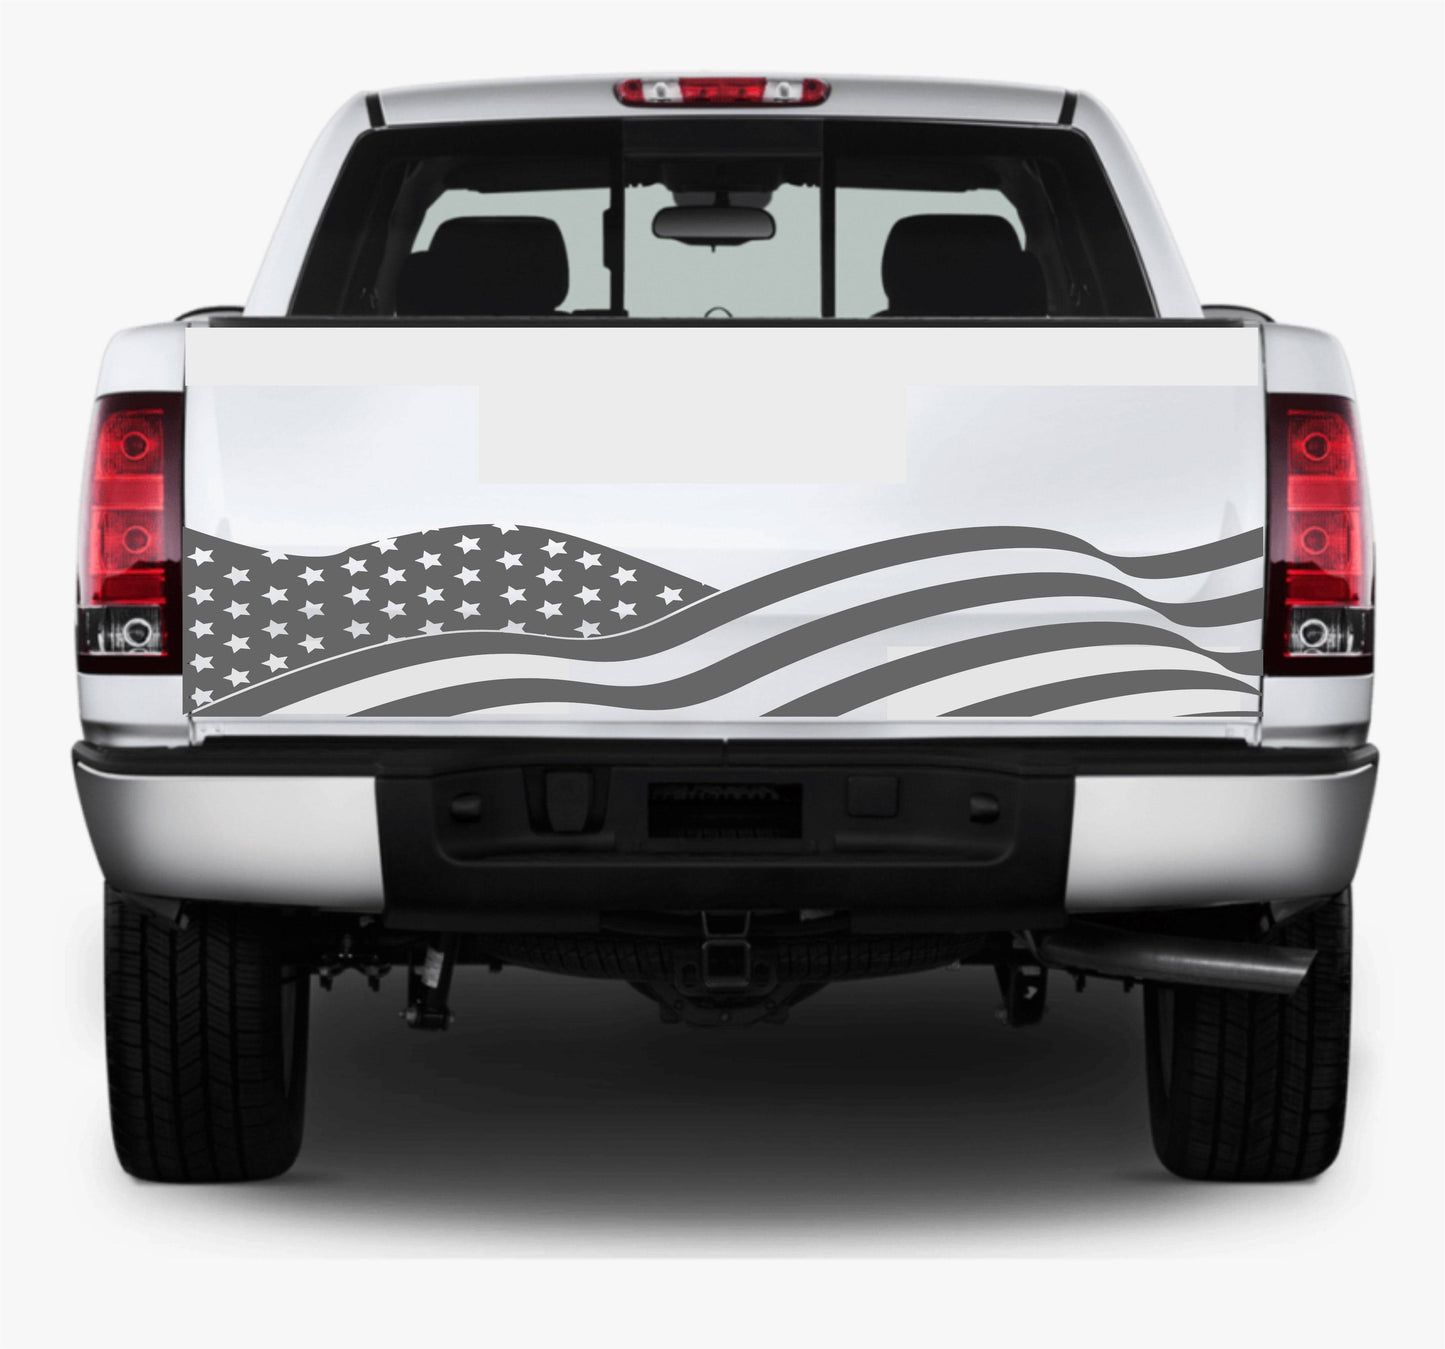 American Flag Decal Stickers | Patriotic Vinyl Decal for Any Trucks, SUV's, Vans, Tailgates, Bumpers...